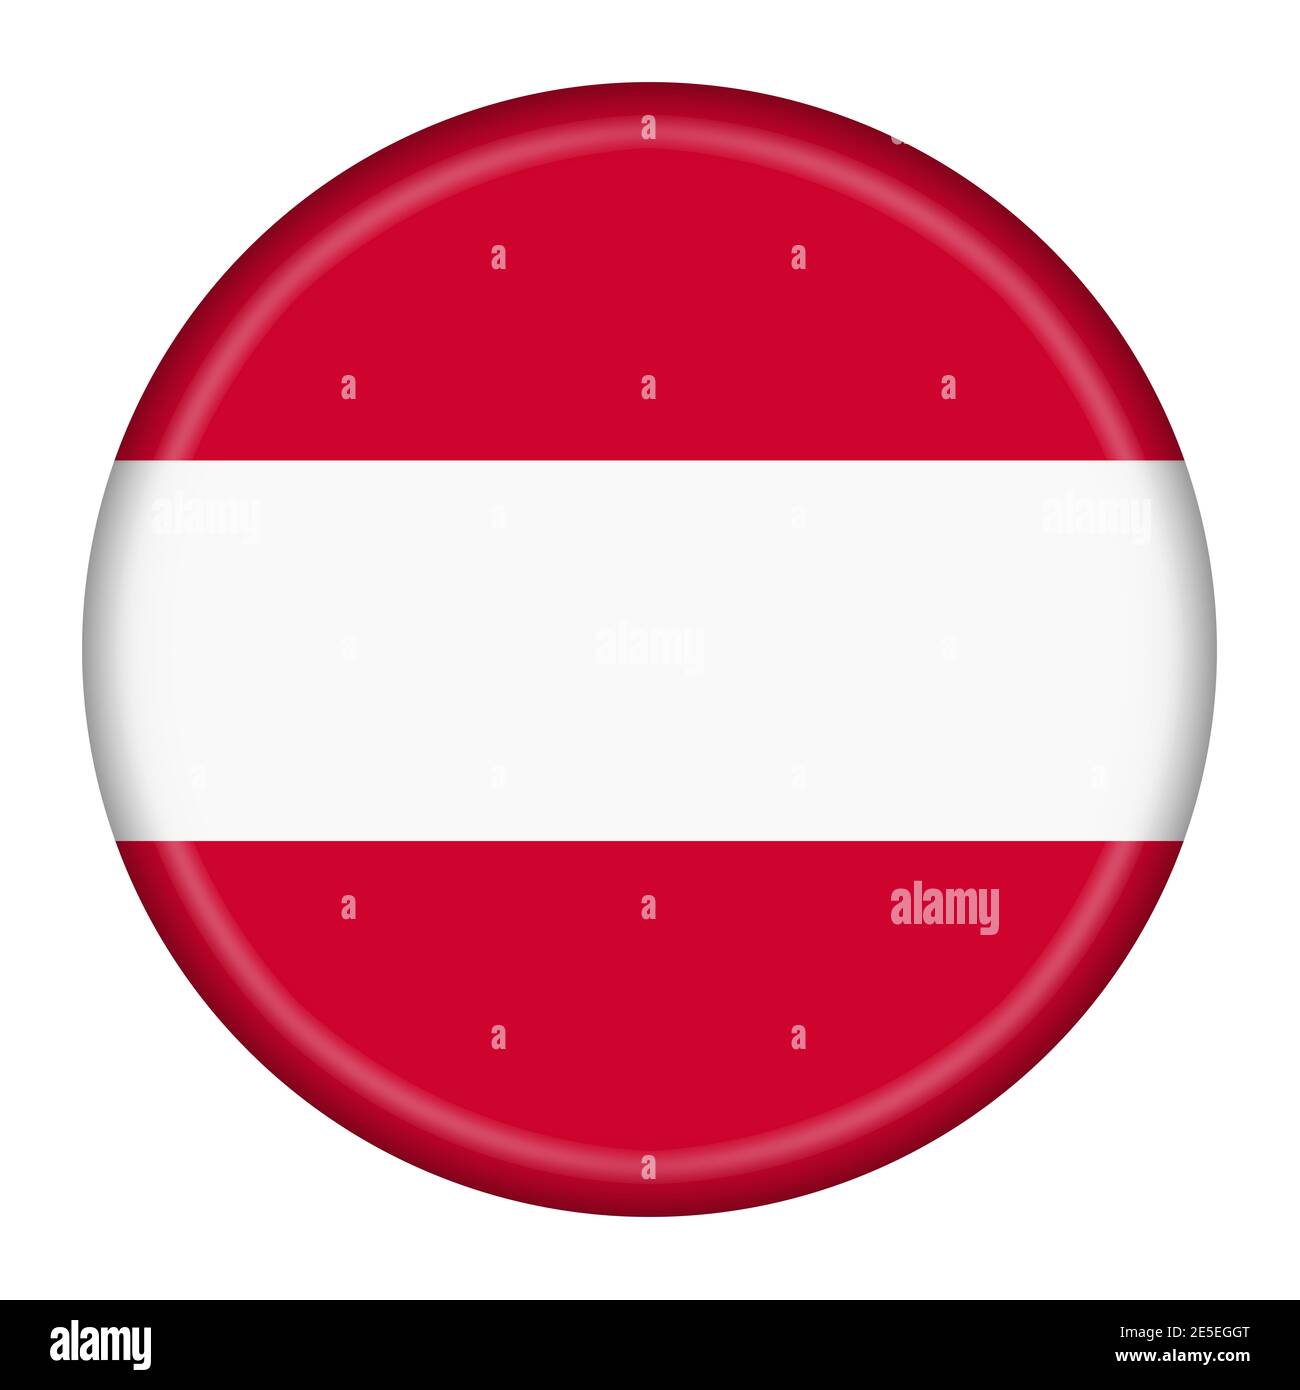 Austria button isolated on white with clipping path 3d illustration Stock Photo